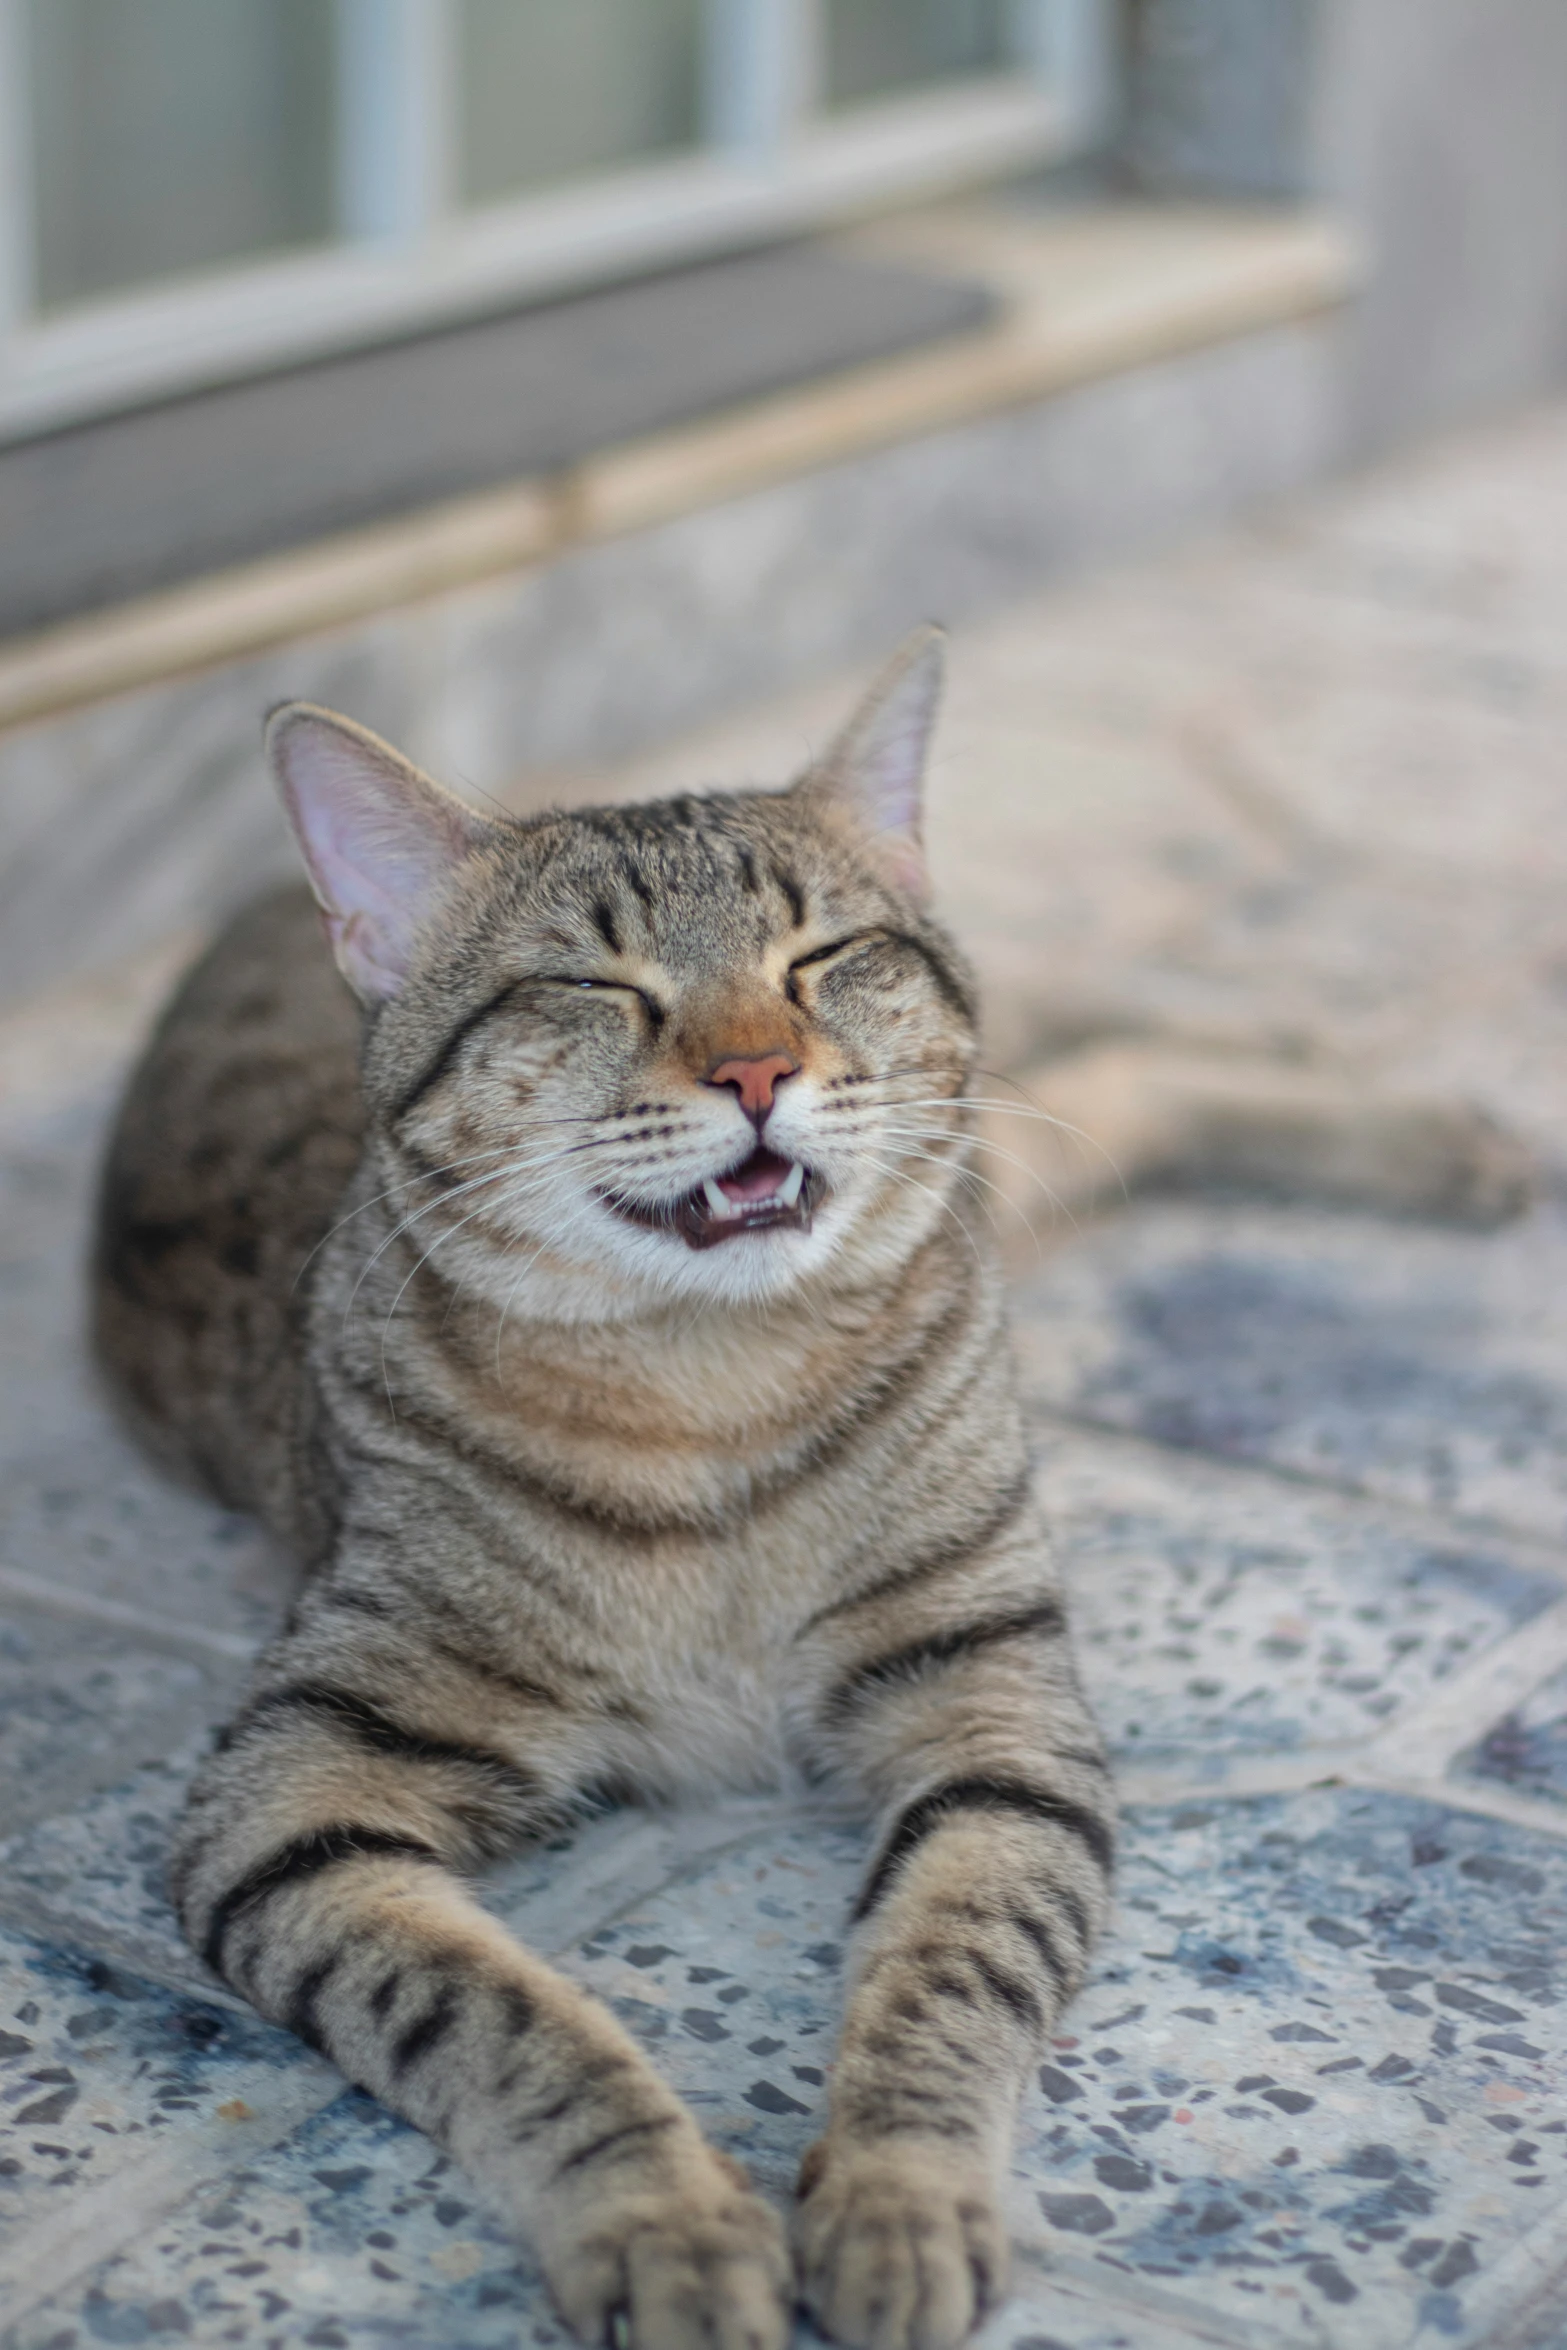 cat smiling and sitting on the tile floor